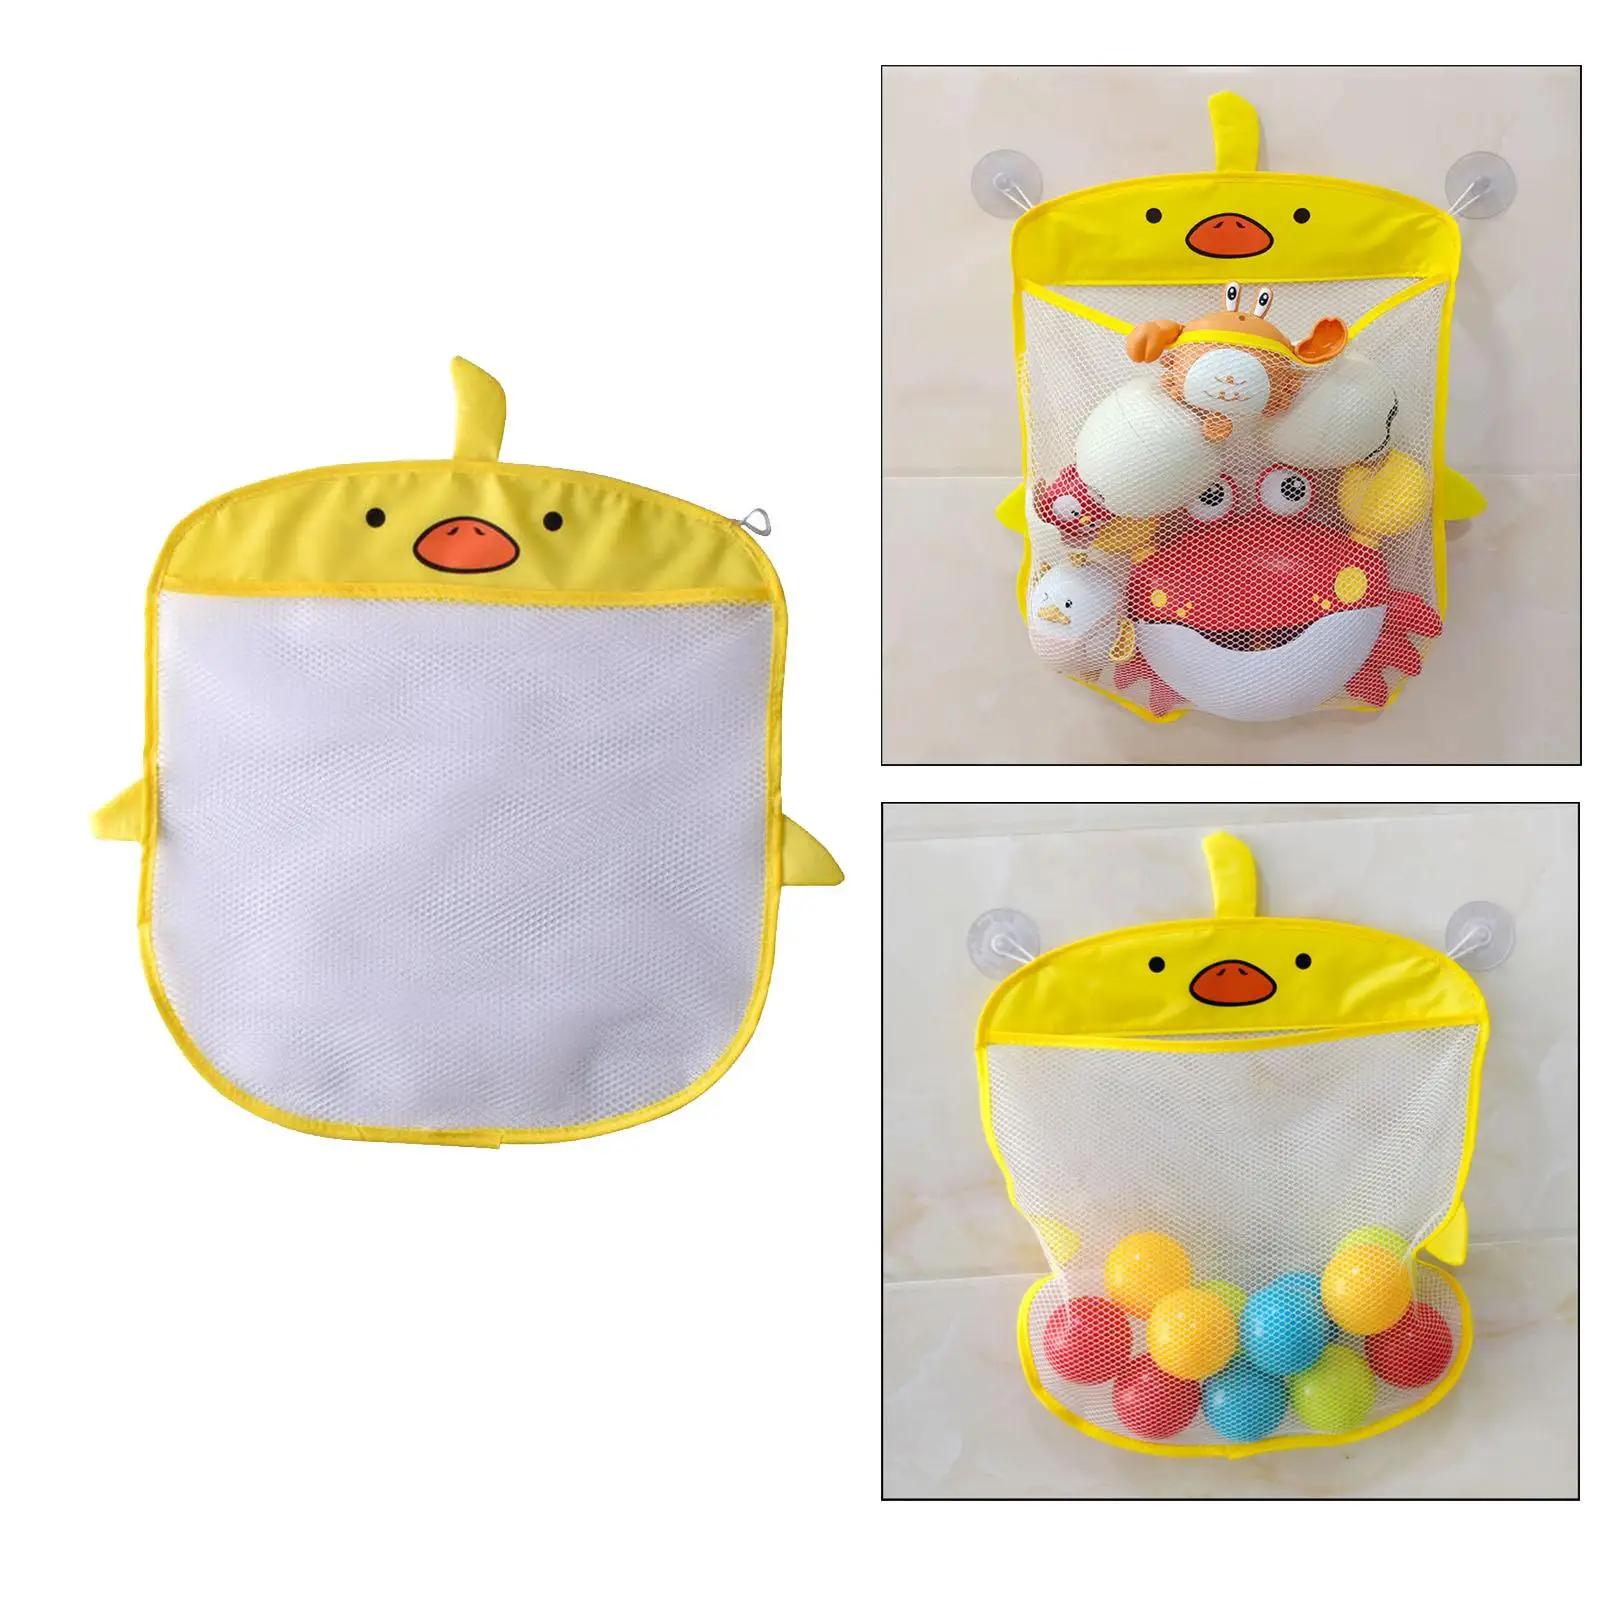 Hanging Toy Storage Mesh Bag Quick Drying Duck Shape Organizer with Suction Cups Holder Toy Organizer Mesh Bag for Baby Children